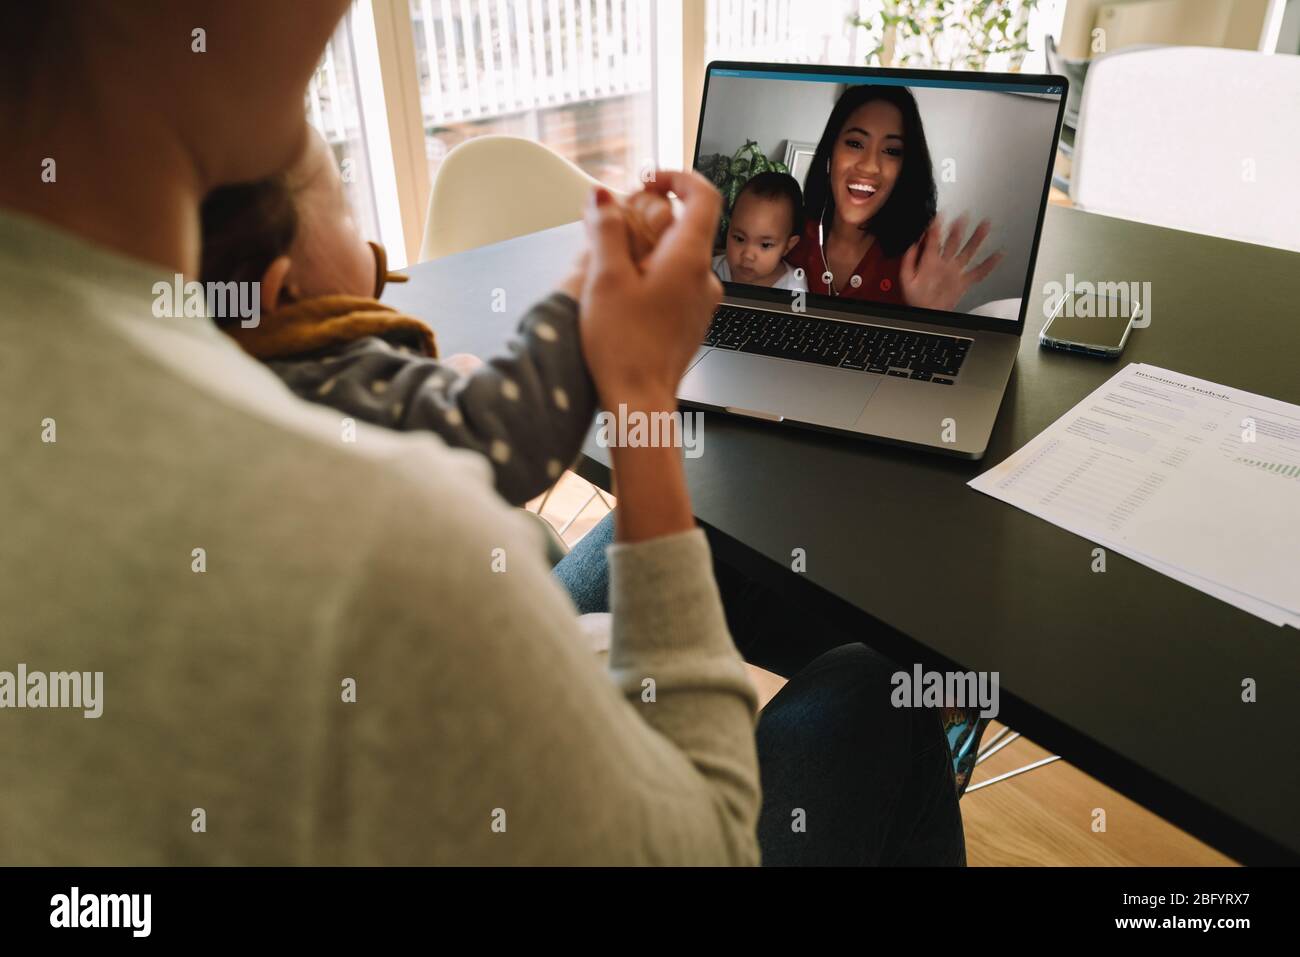 Woman using a laptop to connect with her sister during quarantine. Female friends with their kids having a video call on a laptop computer at home. Stock Photo